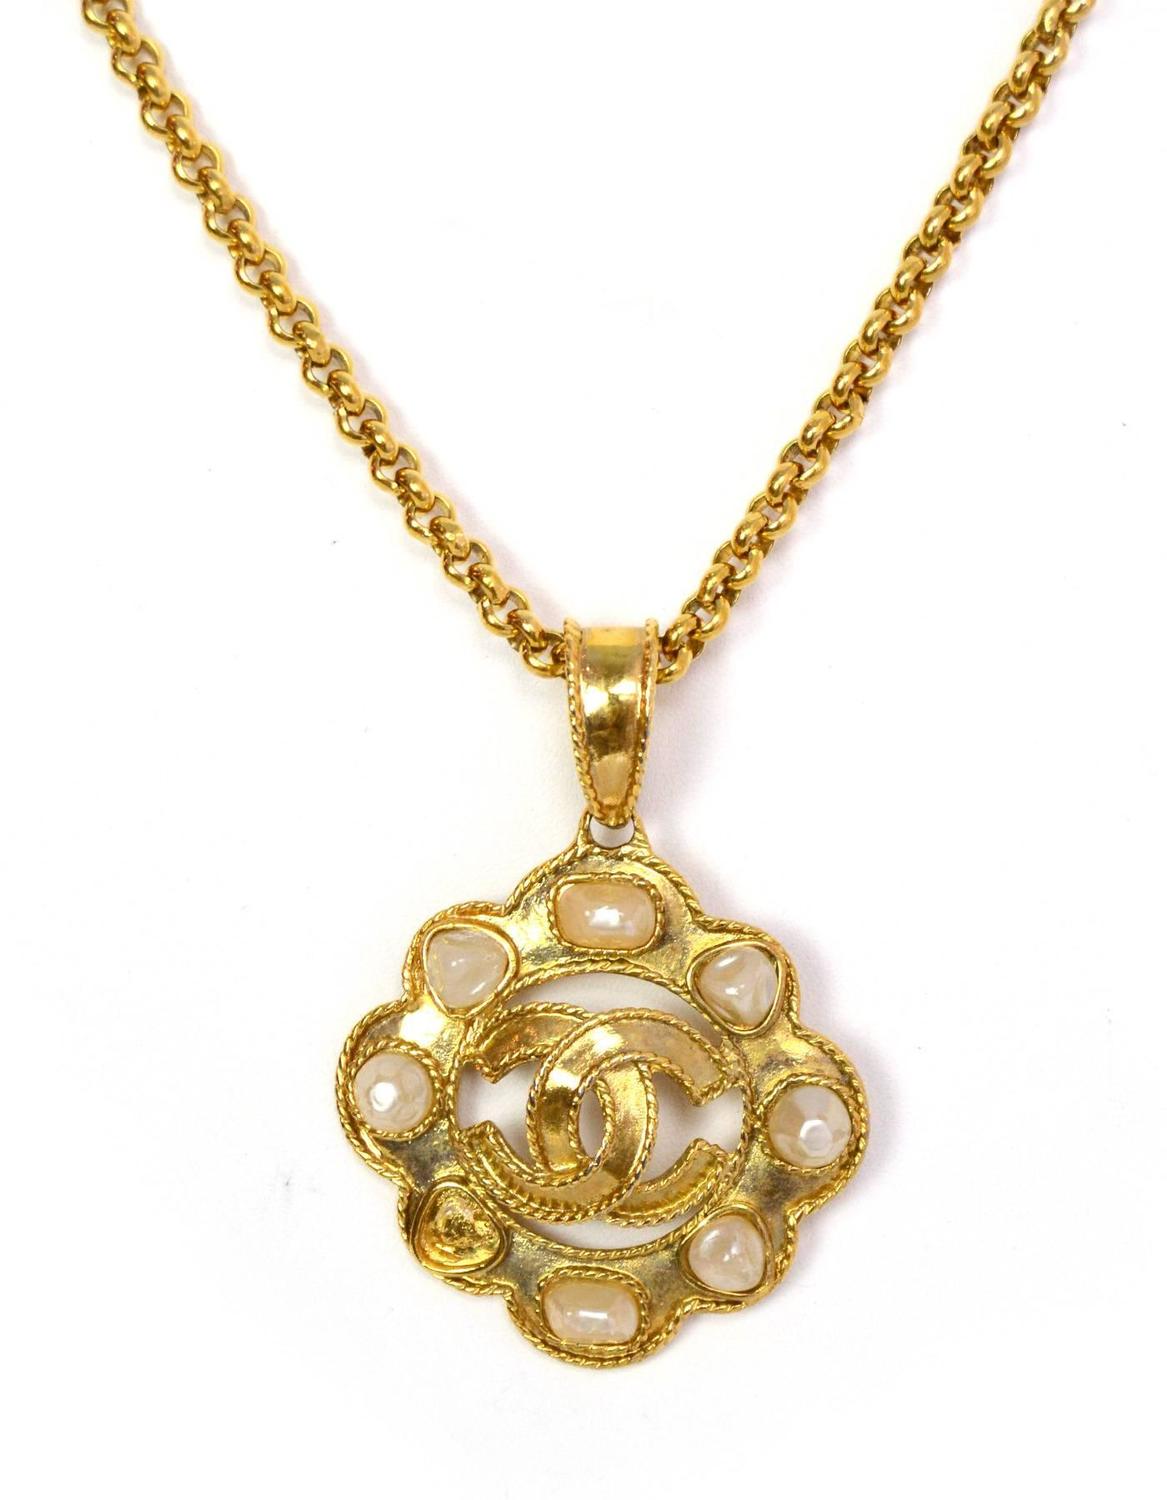 Chanel CC and Faux Pearl Pendant Necklace For Sale at 1stdibs